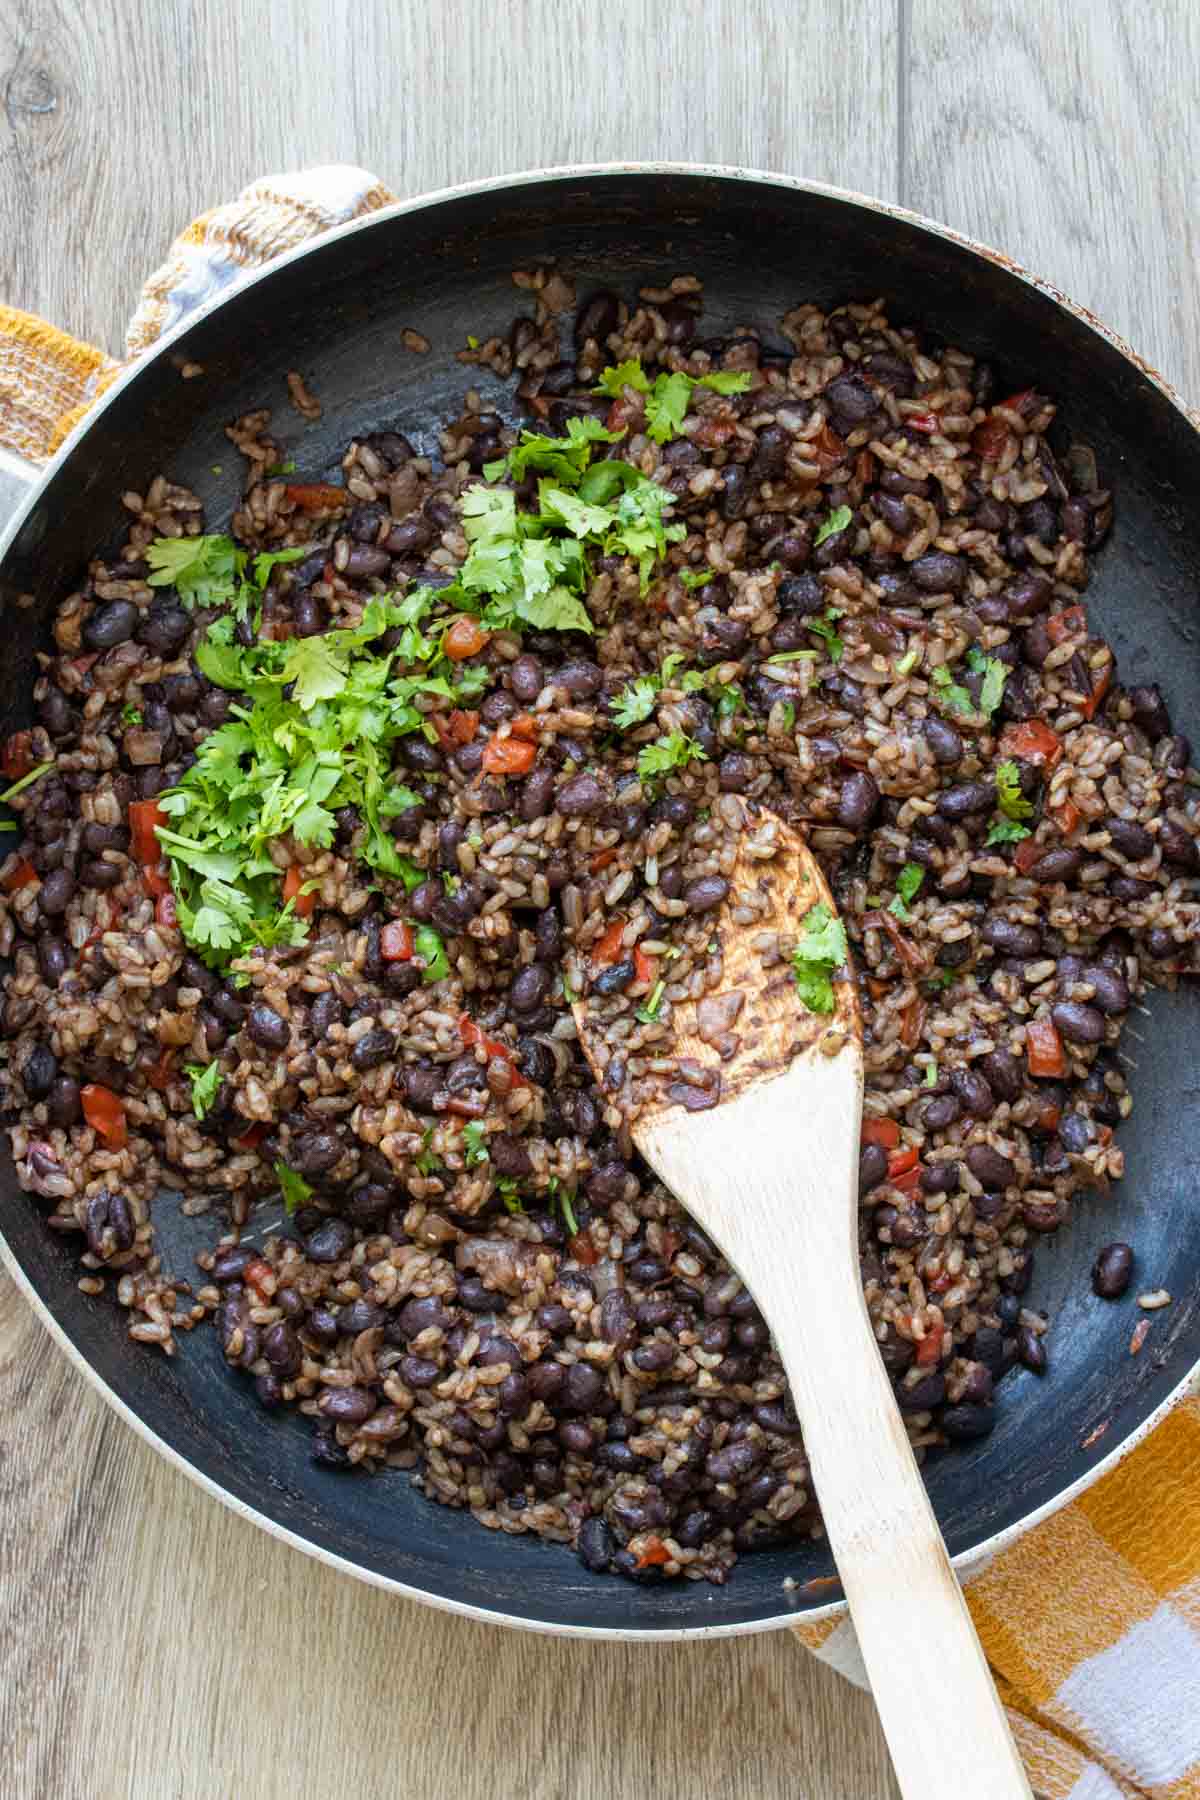 Cilantro being mixed into a black bean, rice and red pepper mix in a pan.